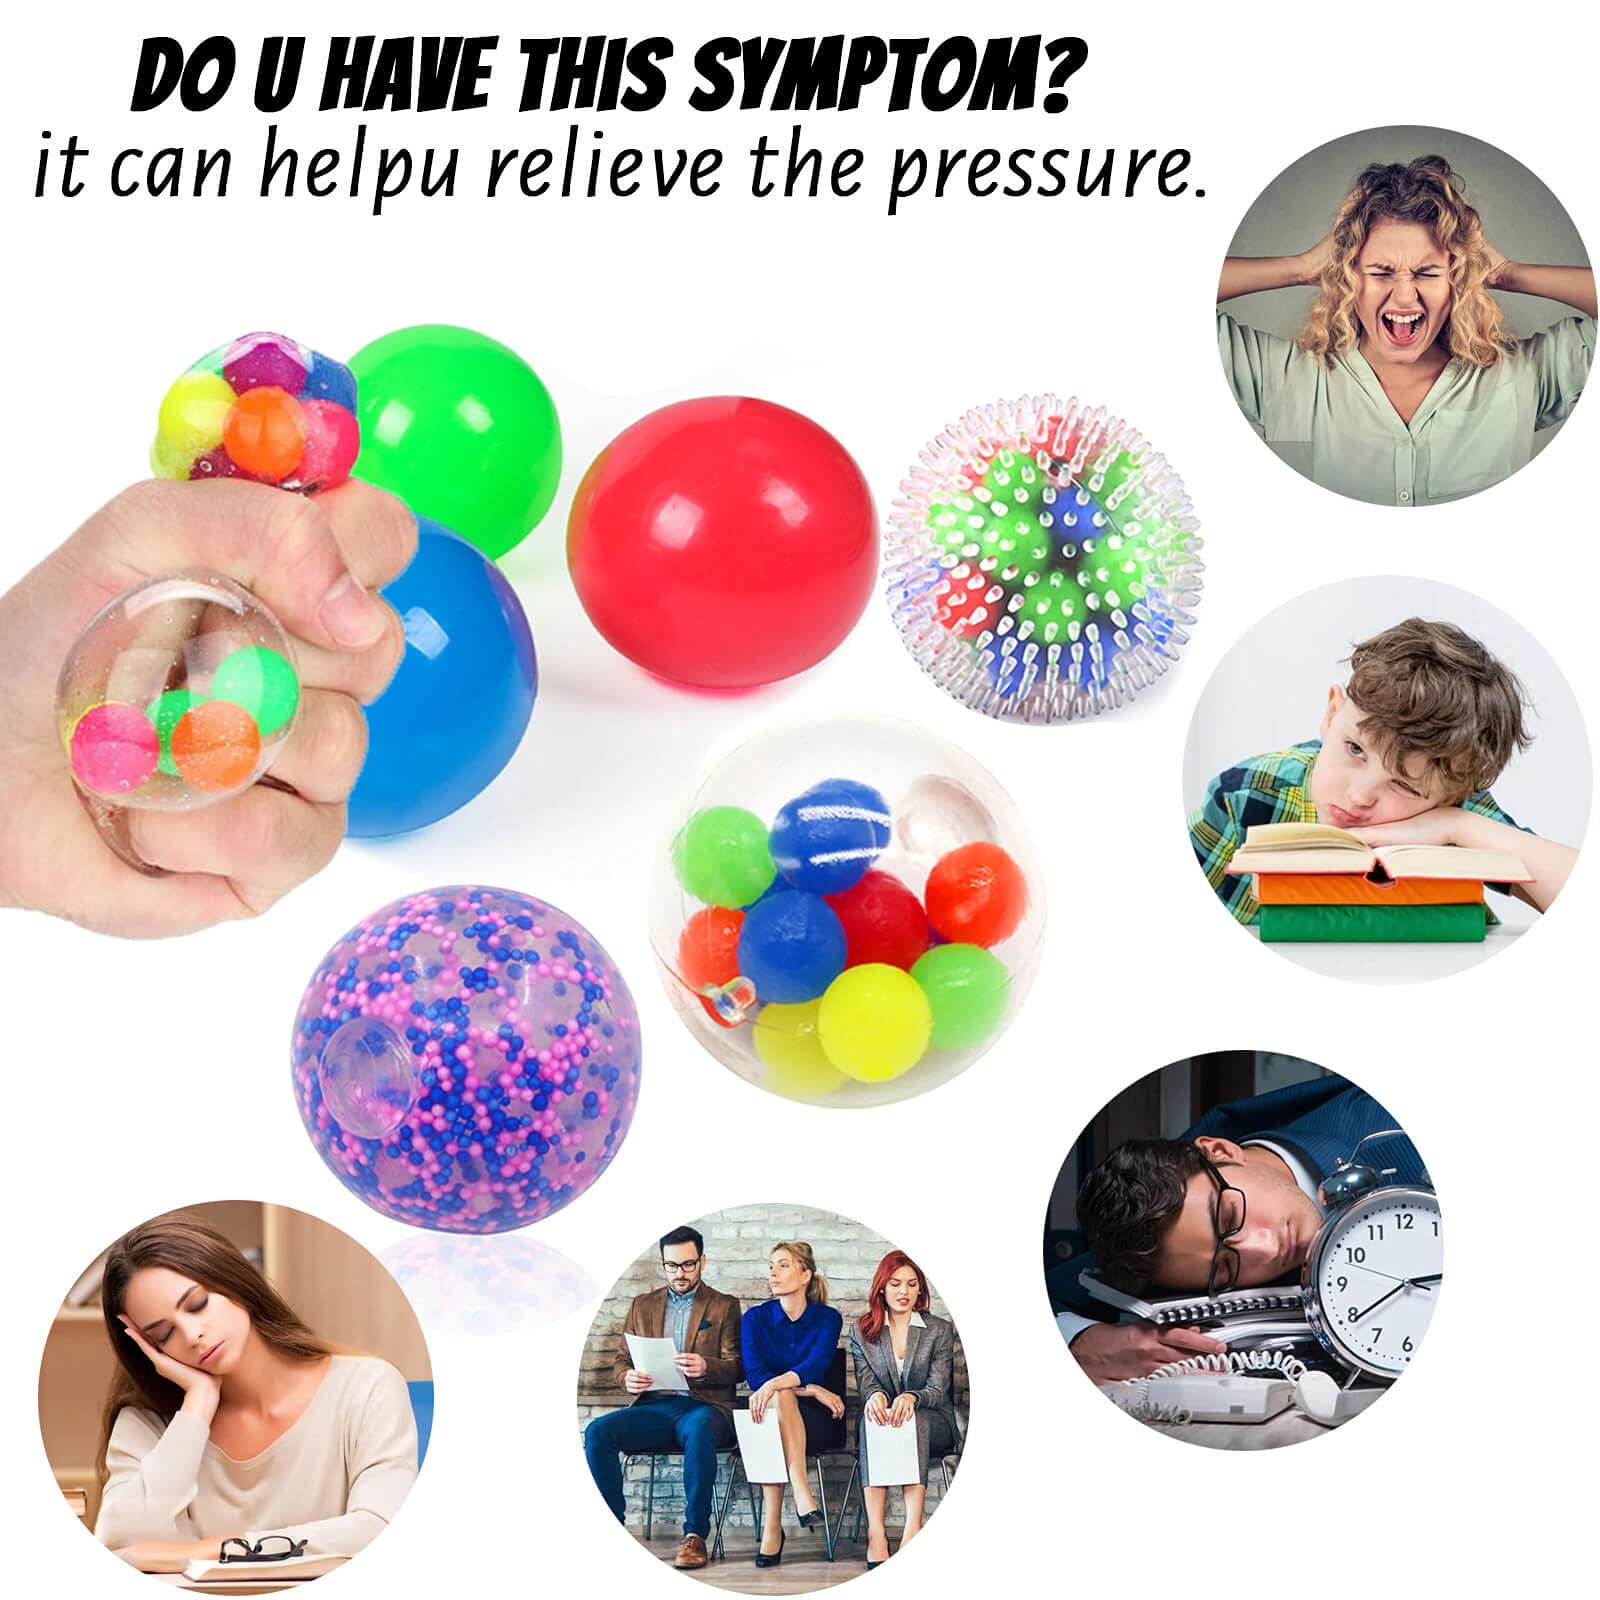 Stress Balls Fidget Toys - 6 Pack Sticky Glowing Balls Sensory Stress Relief Fidget Balls for Kids/Adults to Relax, Anxiety Relief, Decompress, Focus, Squeeze Toys for Autism Birthday/Party Favor